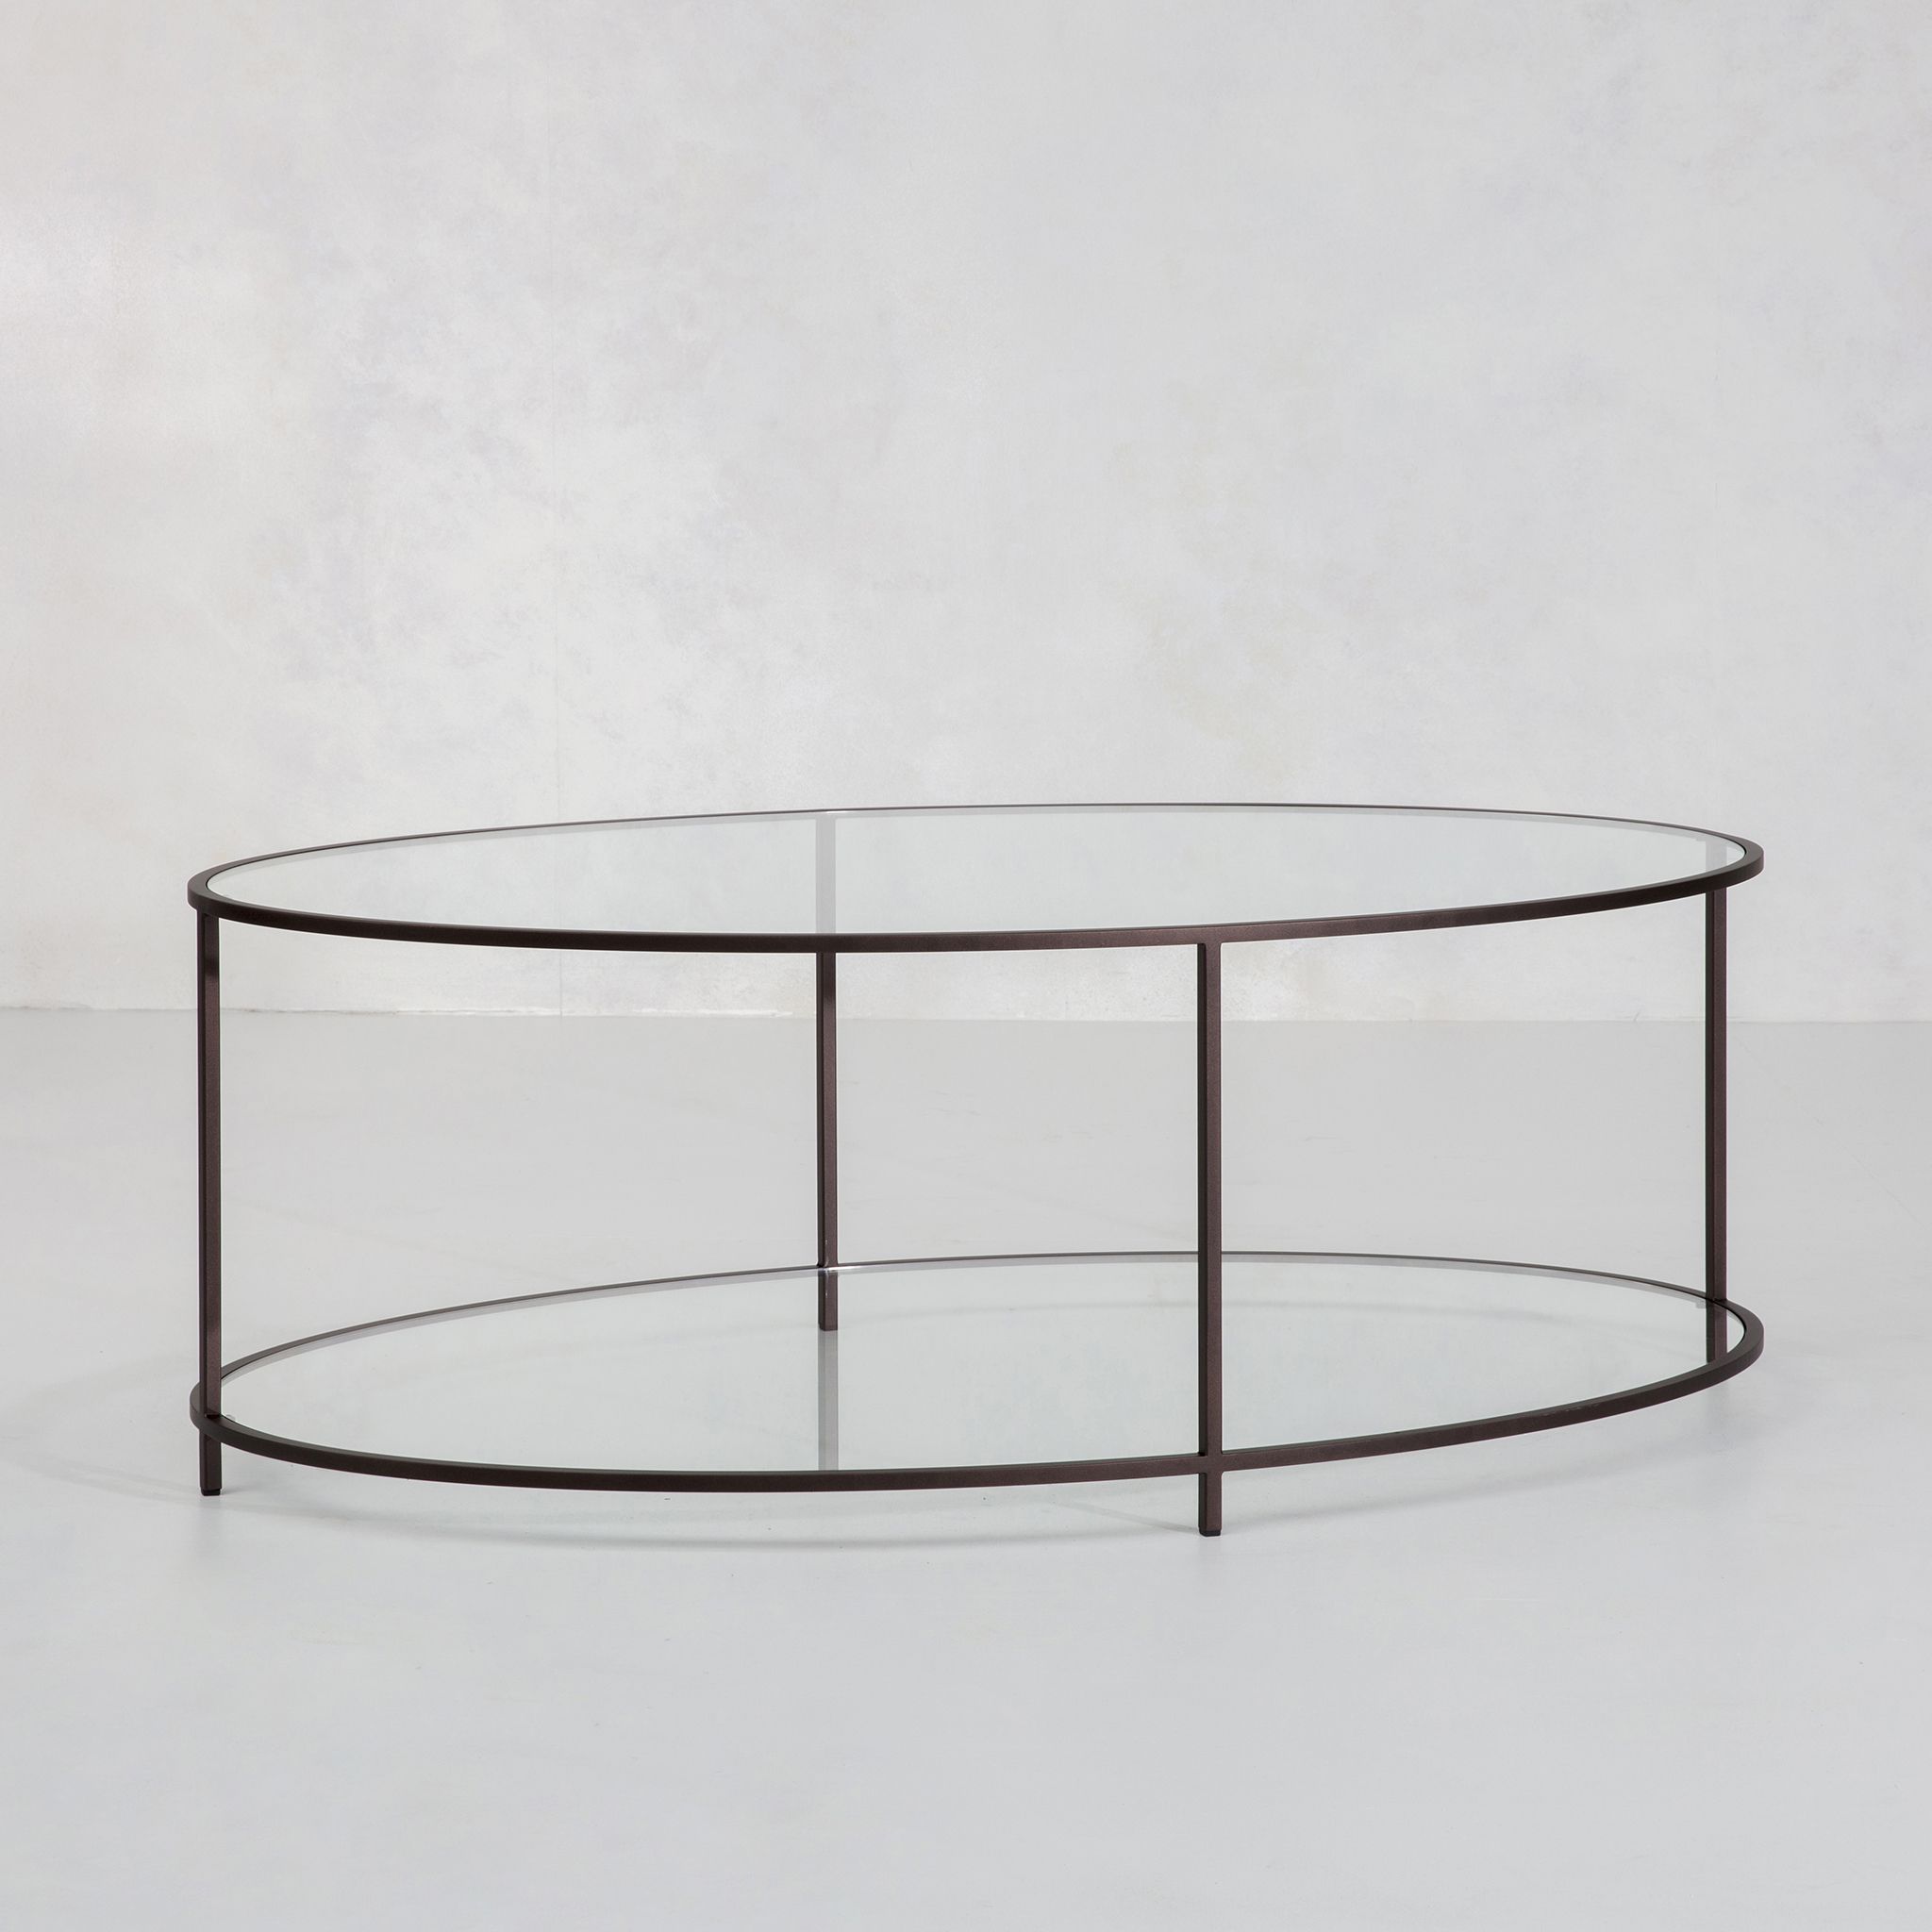 Well Liked Oval Glass Coffee Tables Throughout Lexington Oval/round Coffee Table – R Hughes (View 4 of 10)